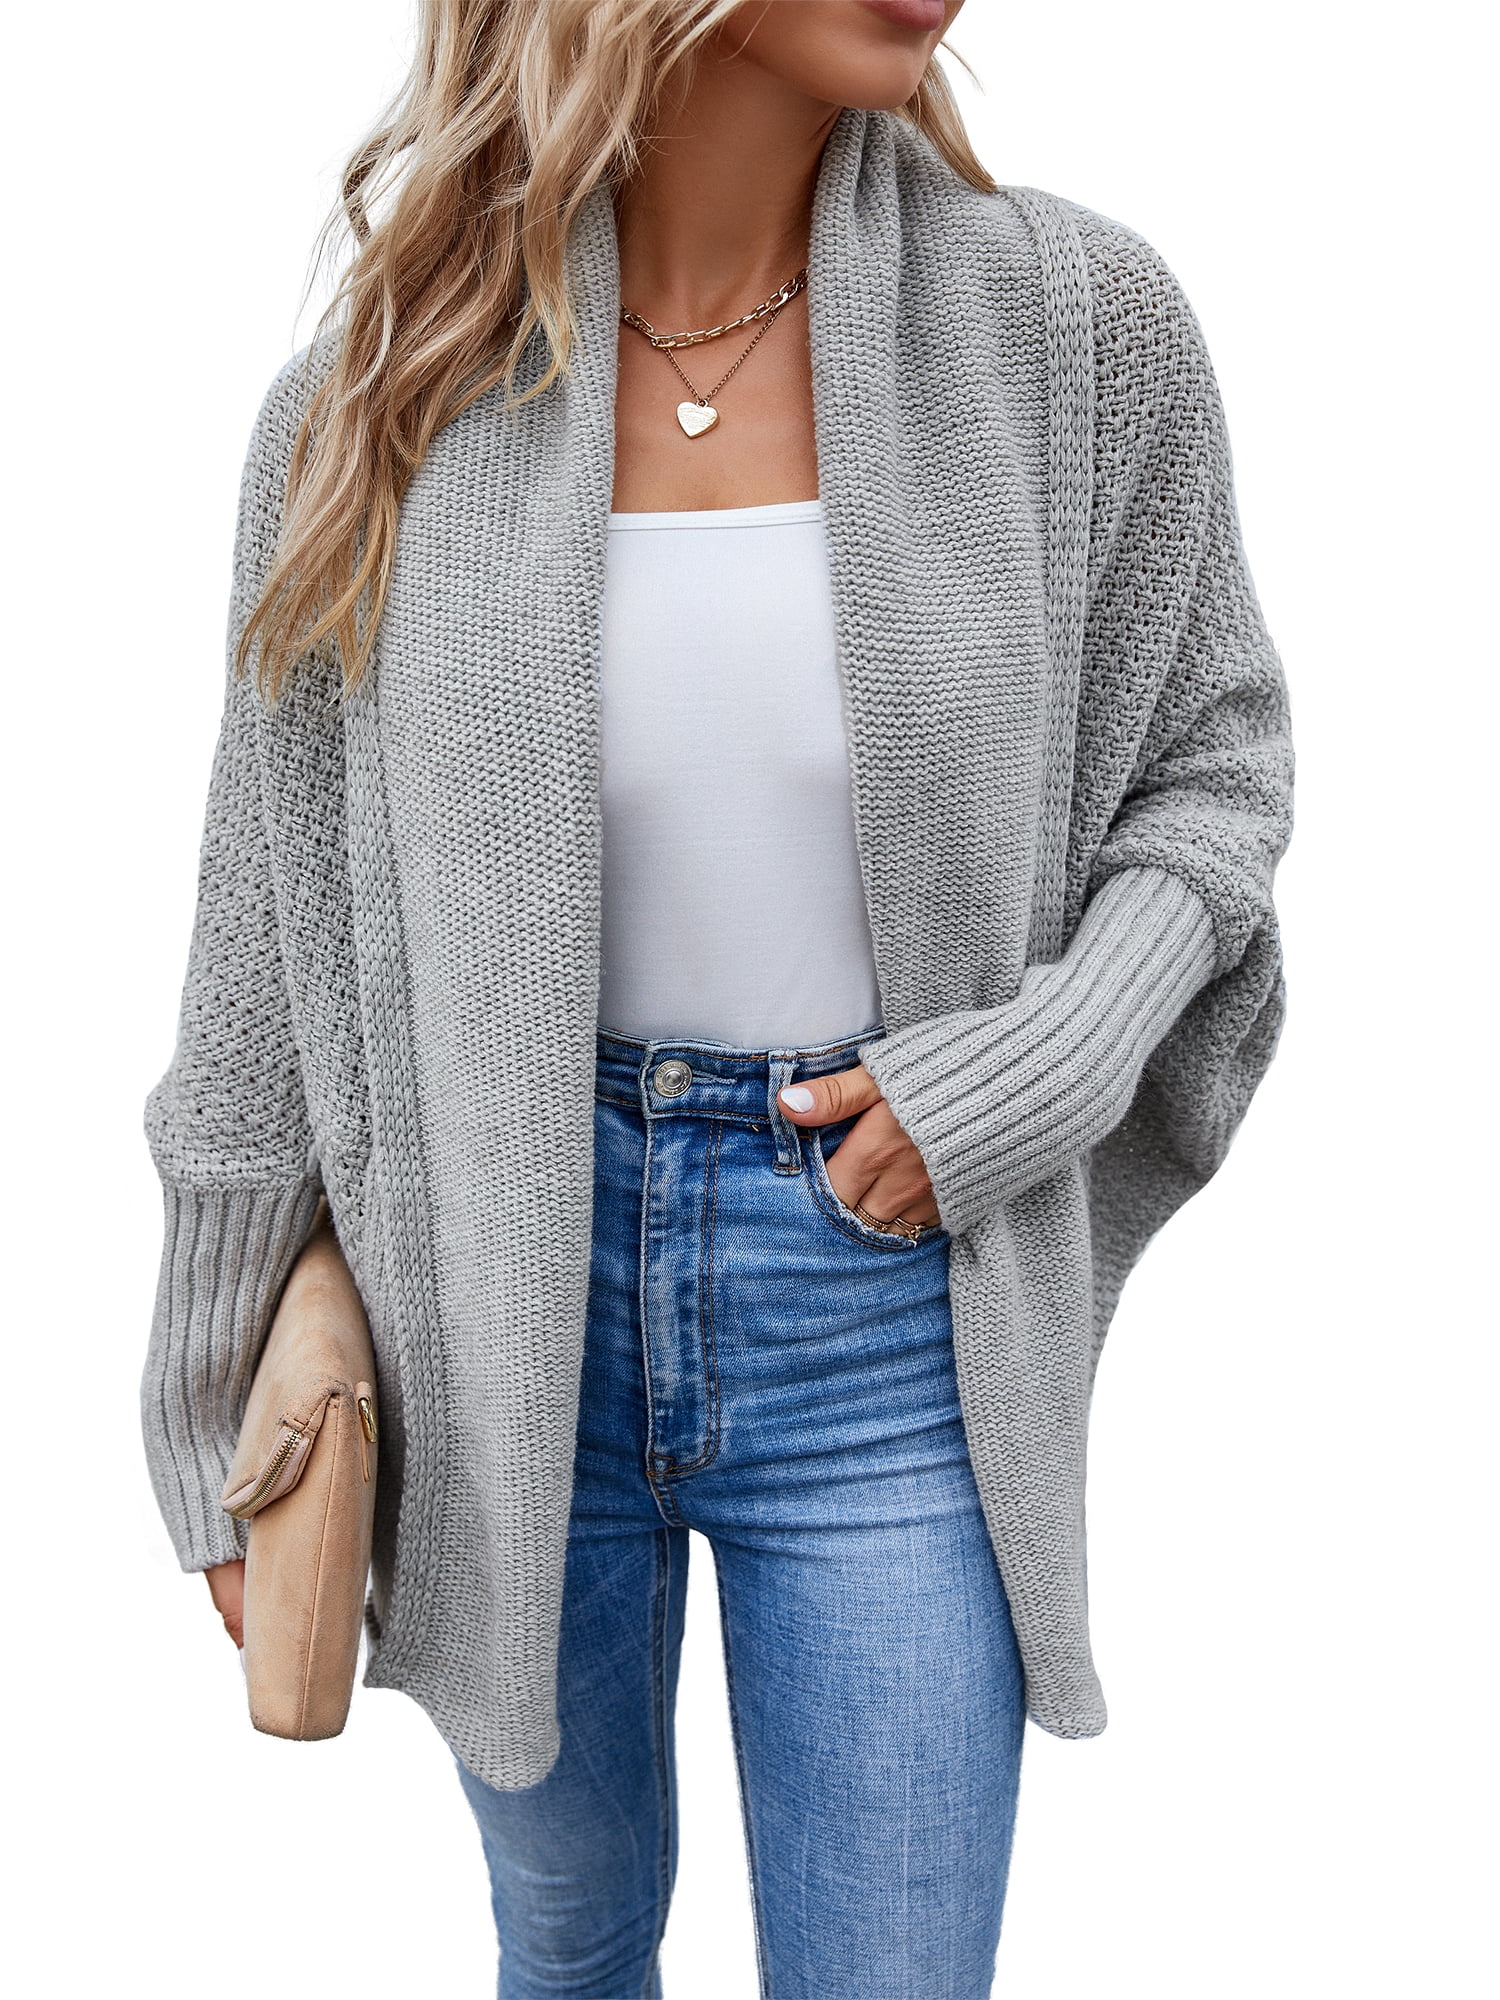 Harence Womens Cardigan Sweater Loose Thick Knit Batwing Drape Casual ...